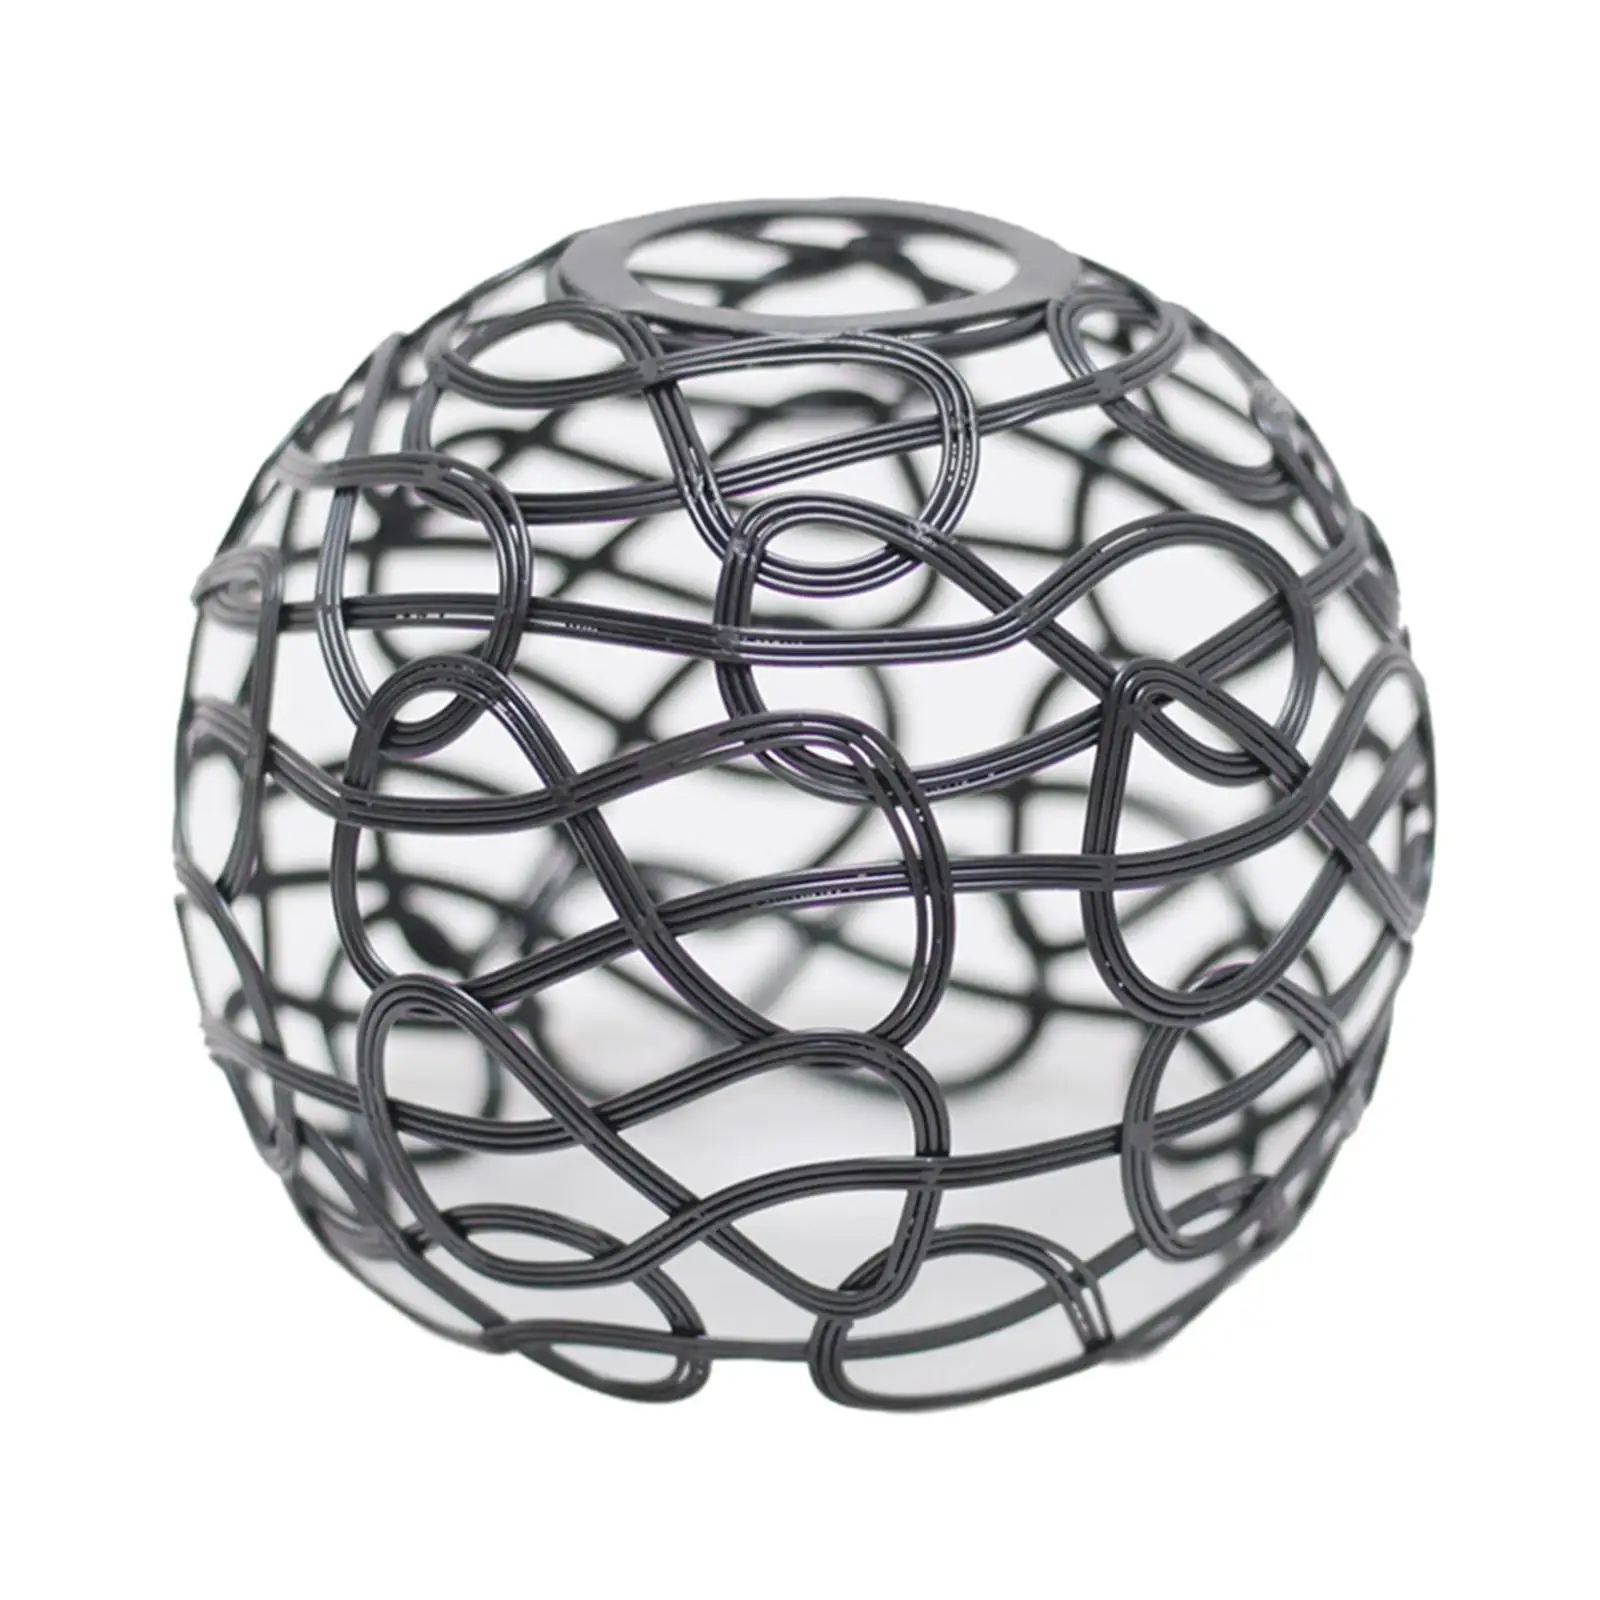 Decorative Iron Wire Lampshade Ceiling Pendant Light Shade Metal Lamp Cage Hollow Chandelier Cover for Home Bar Hotel Decoration